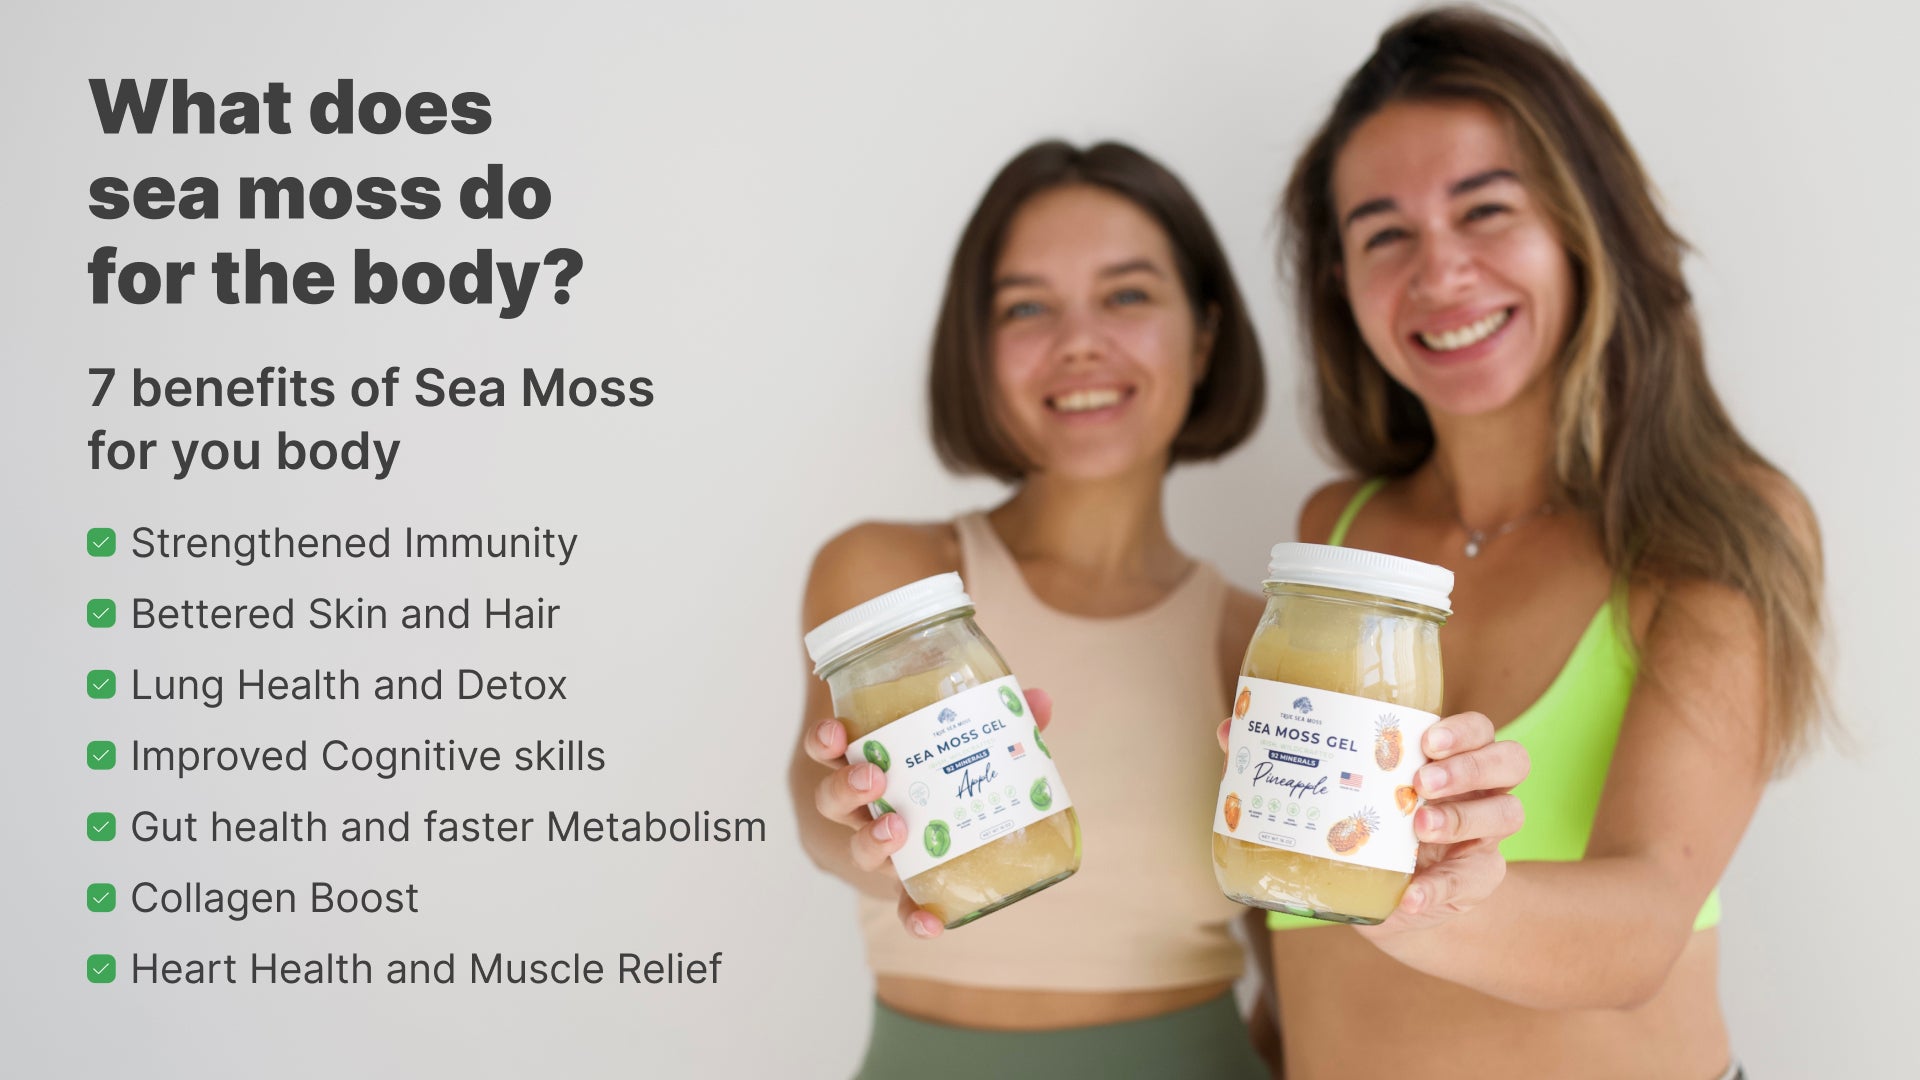 what does sea moss do for the body.jpg__PID:7cedcc92-3923-4f74-888e-6ef1520cbaff